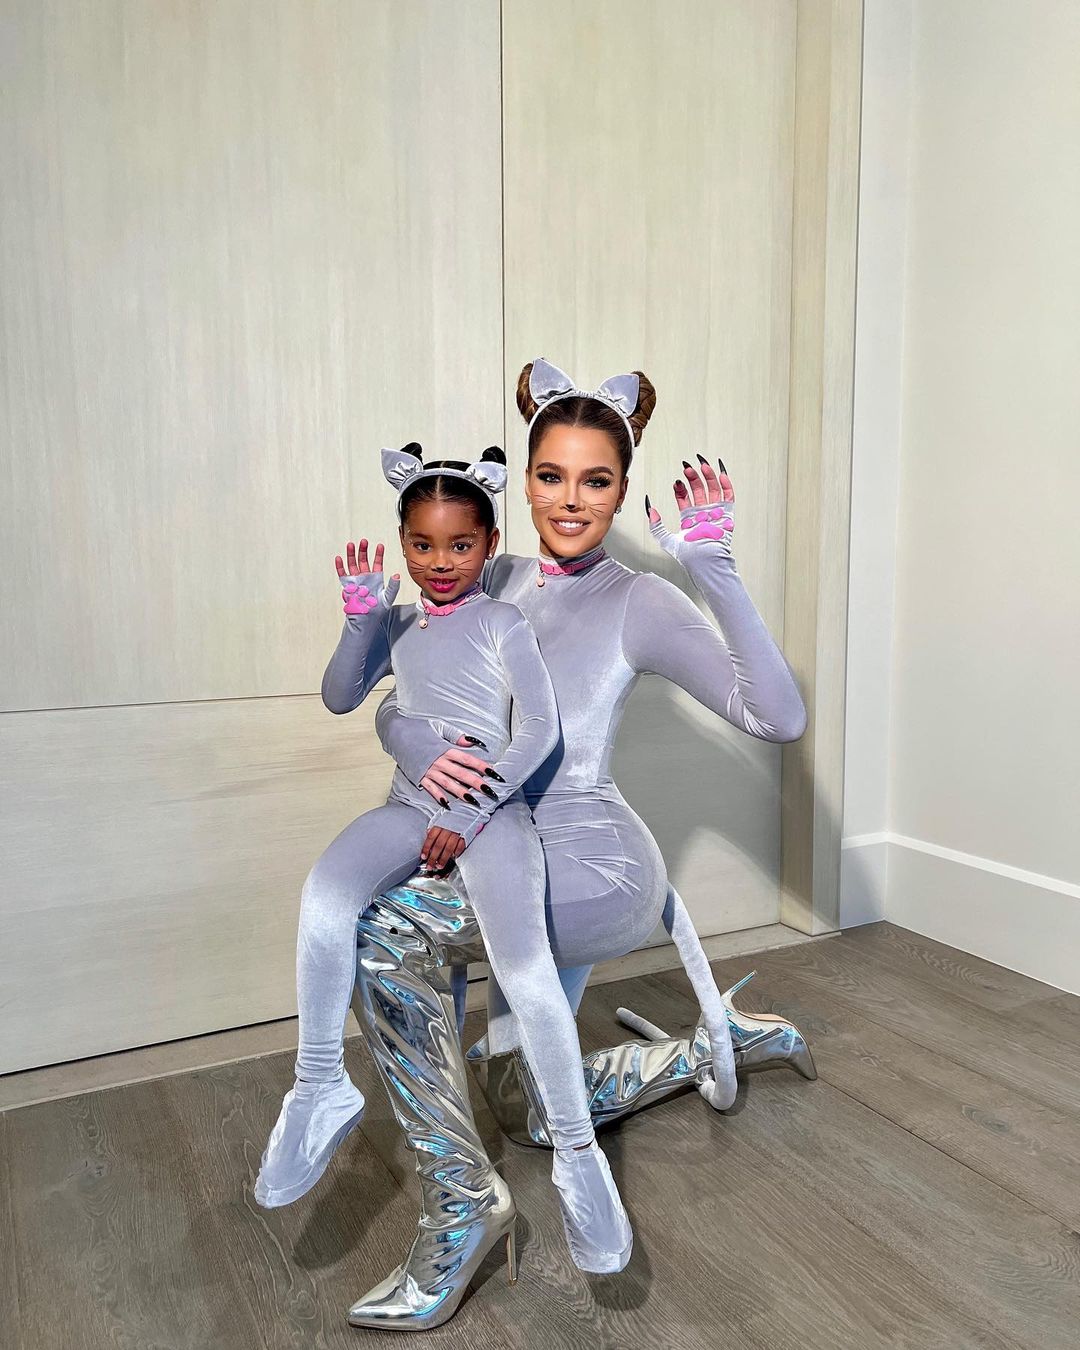 Khloe Kardashian shares sweet video of daughter True, 4, with her baby brother as star keeps son’s name a secret